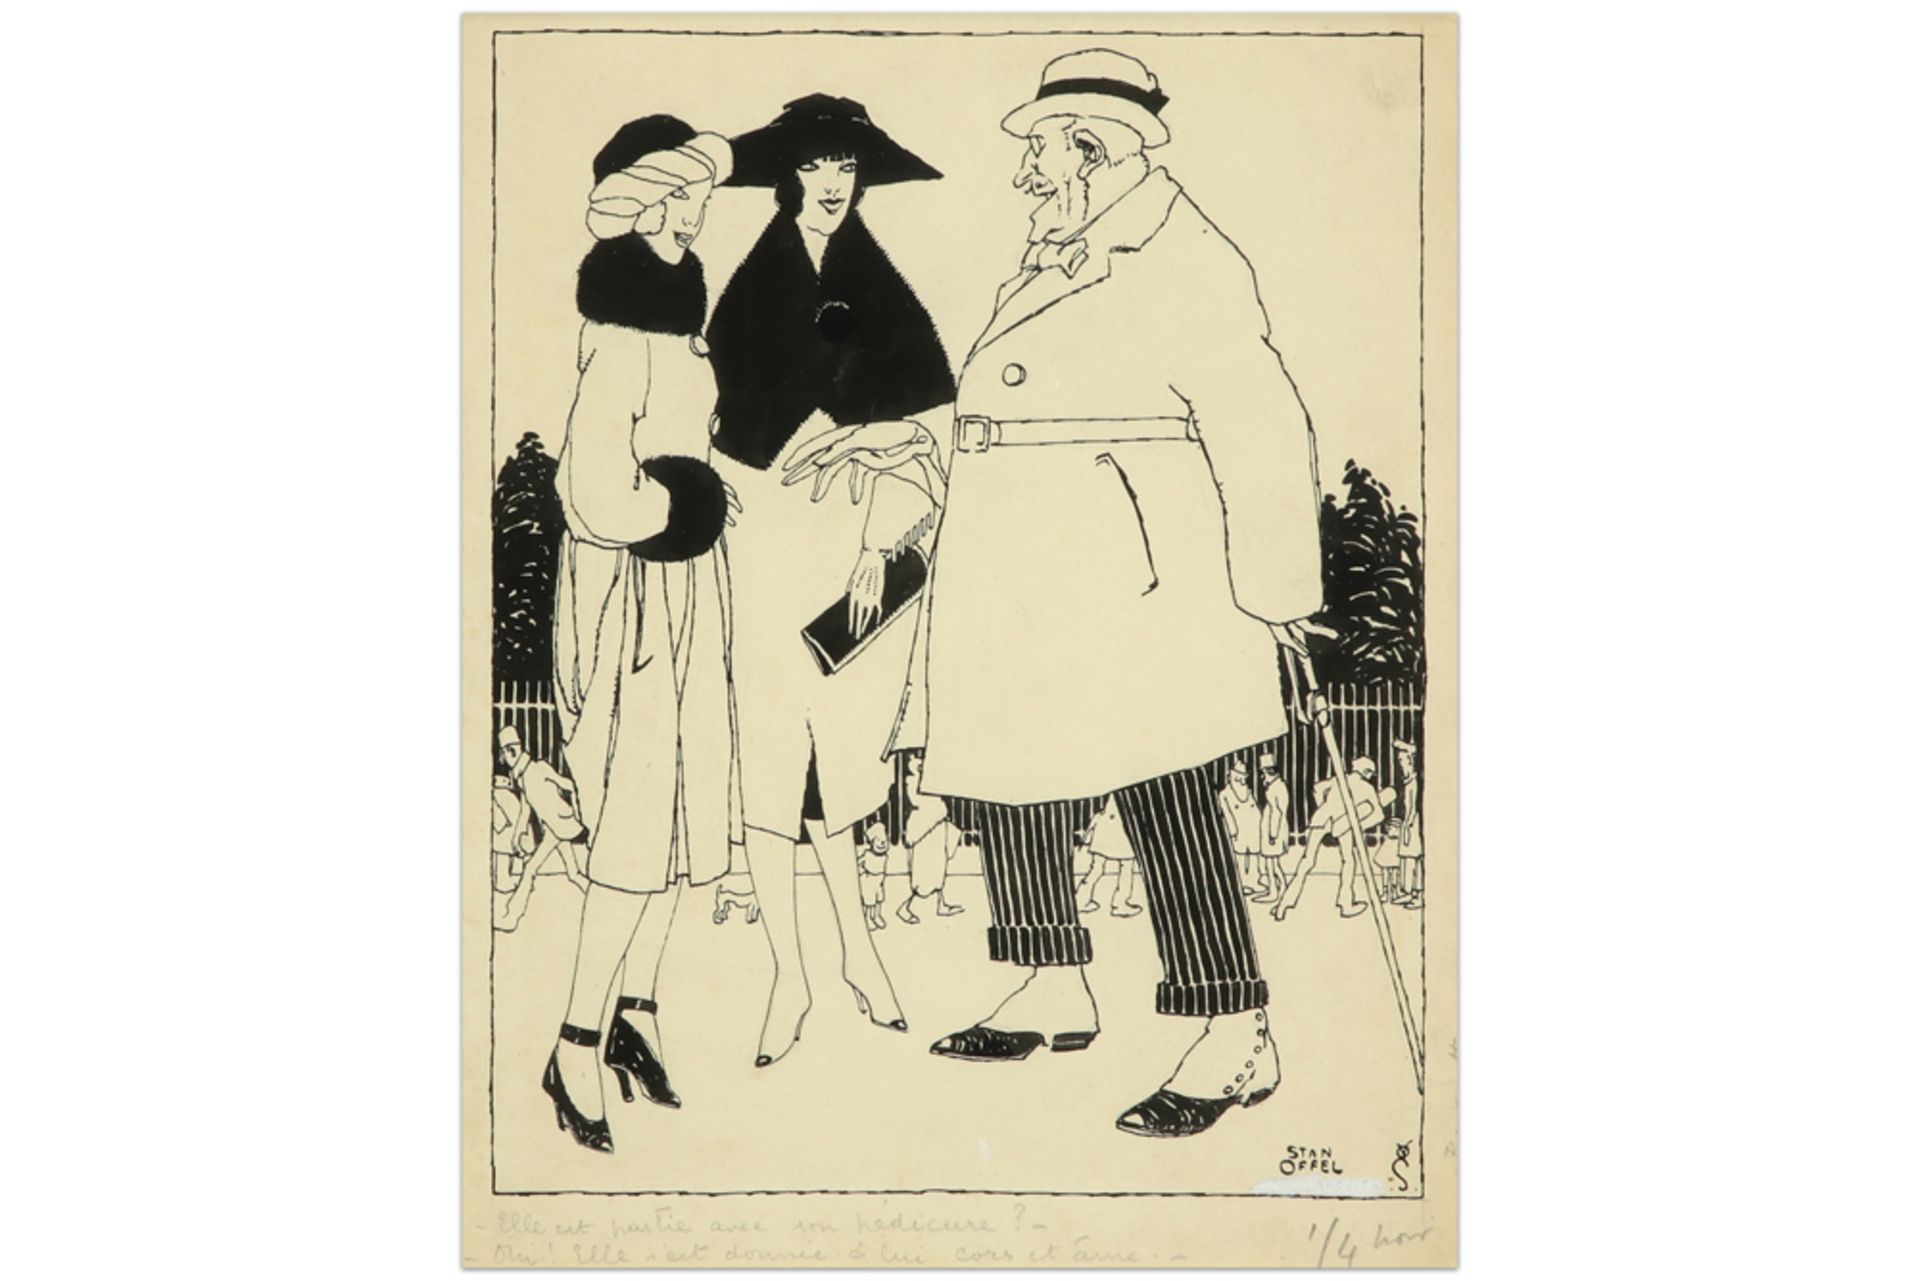 20th Cent. Belgian lithograph - plate signed Stan Van Offel || VAN OFFEL STAN (1885 - 1924) litho n°